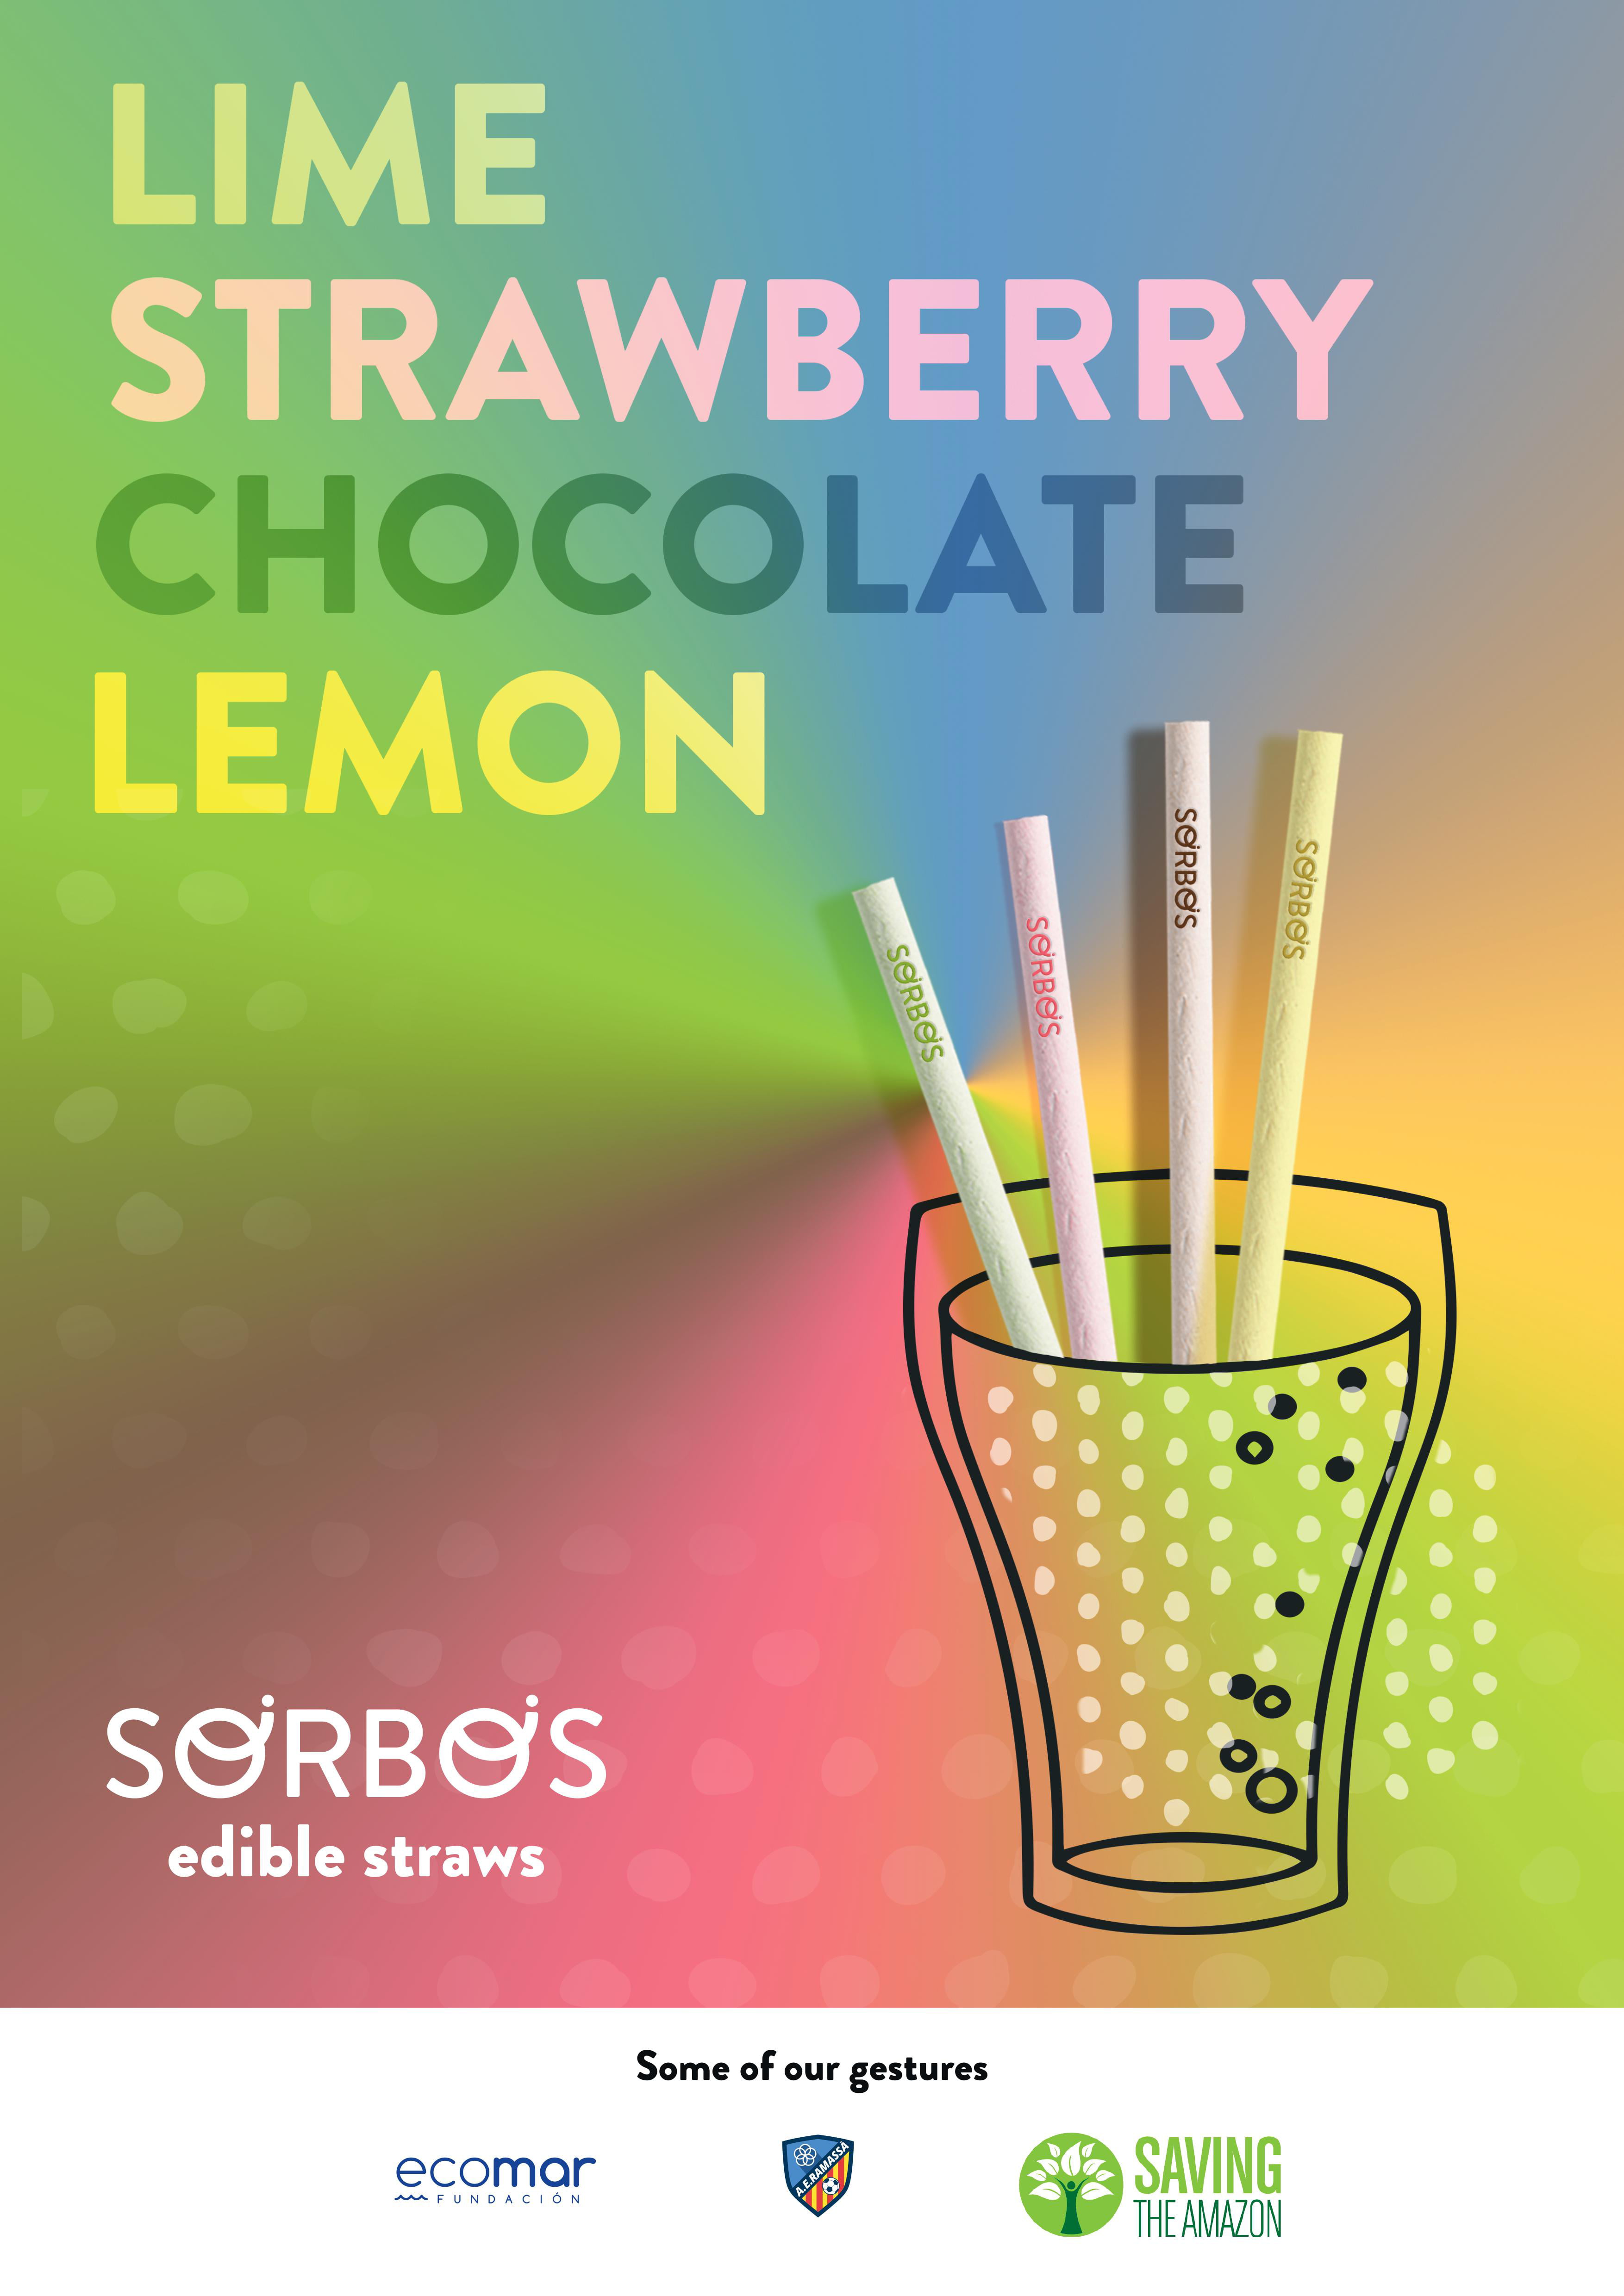 Sorbos 7 1/2 Edible Strawberry Flavored Paper Wrapped Straw - 200/Case